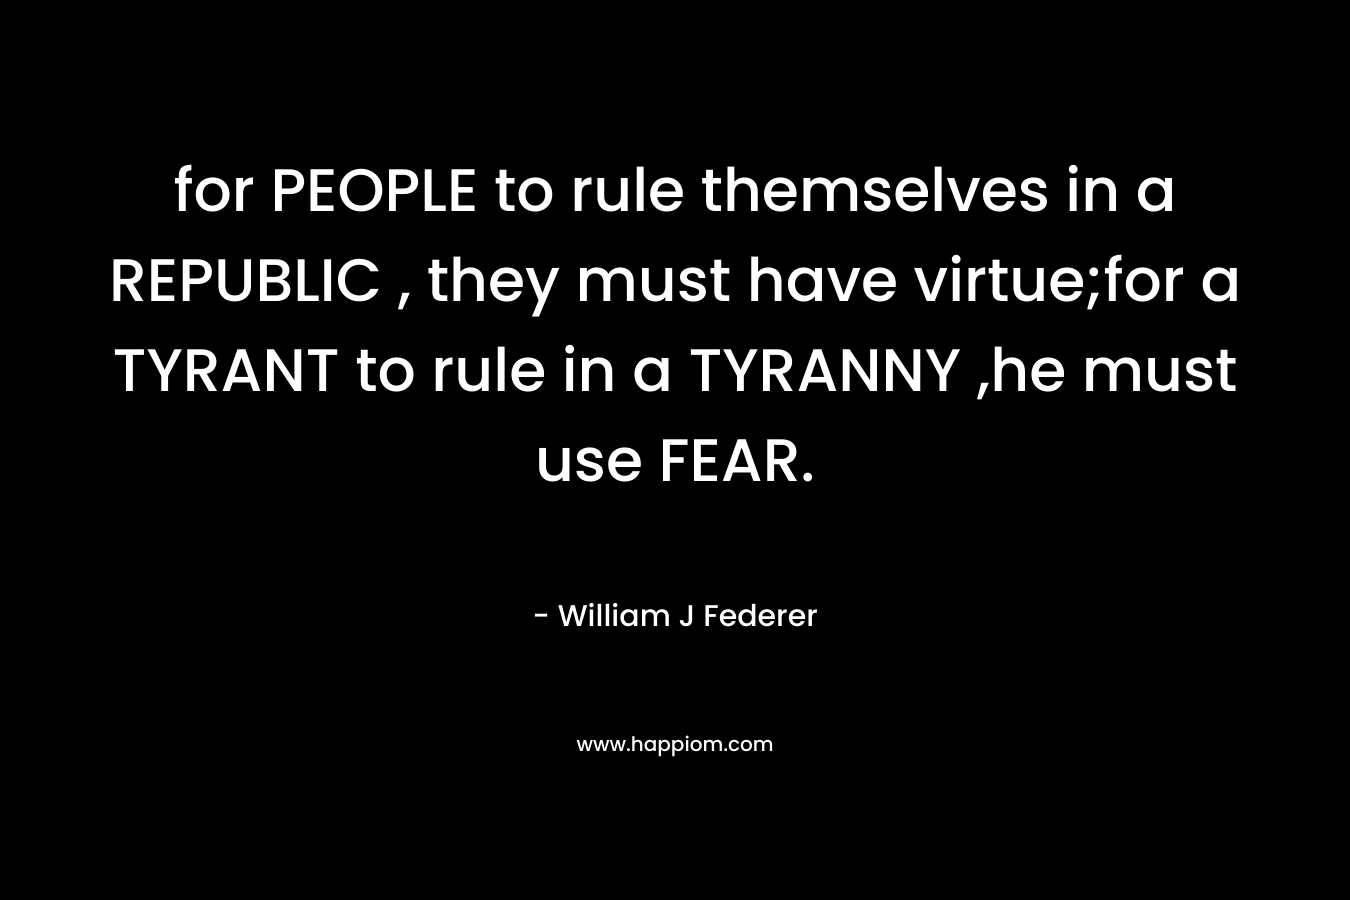 for PEOPLE to rule themselves in a REPUBLIC , they must have virtue;for a TYRANT to rule in a TYRANNY ,he must use FEAR.